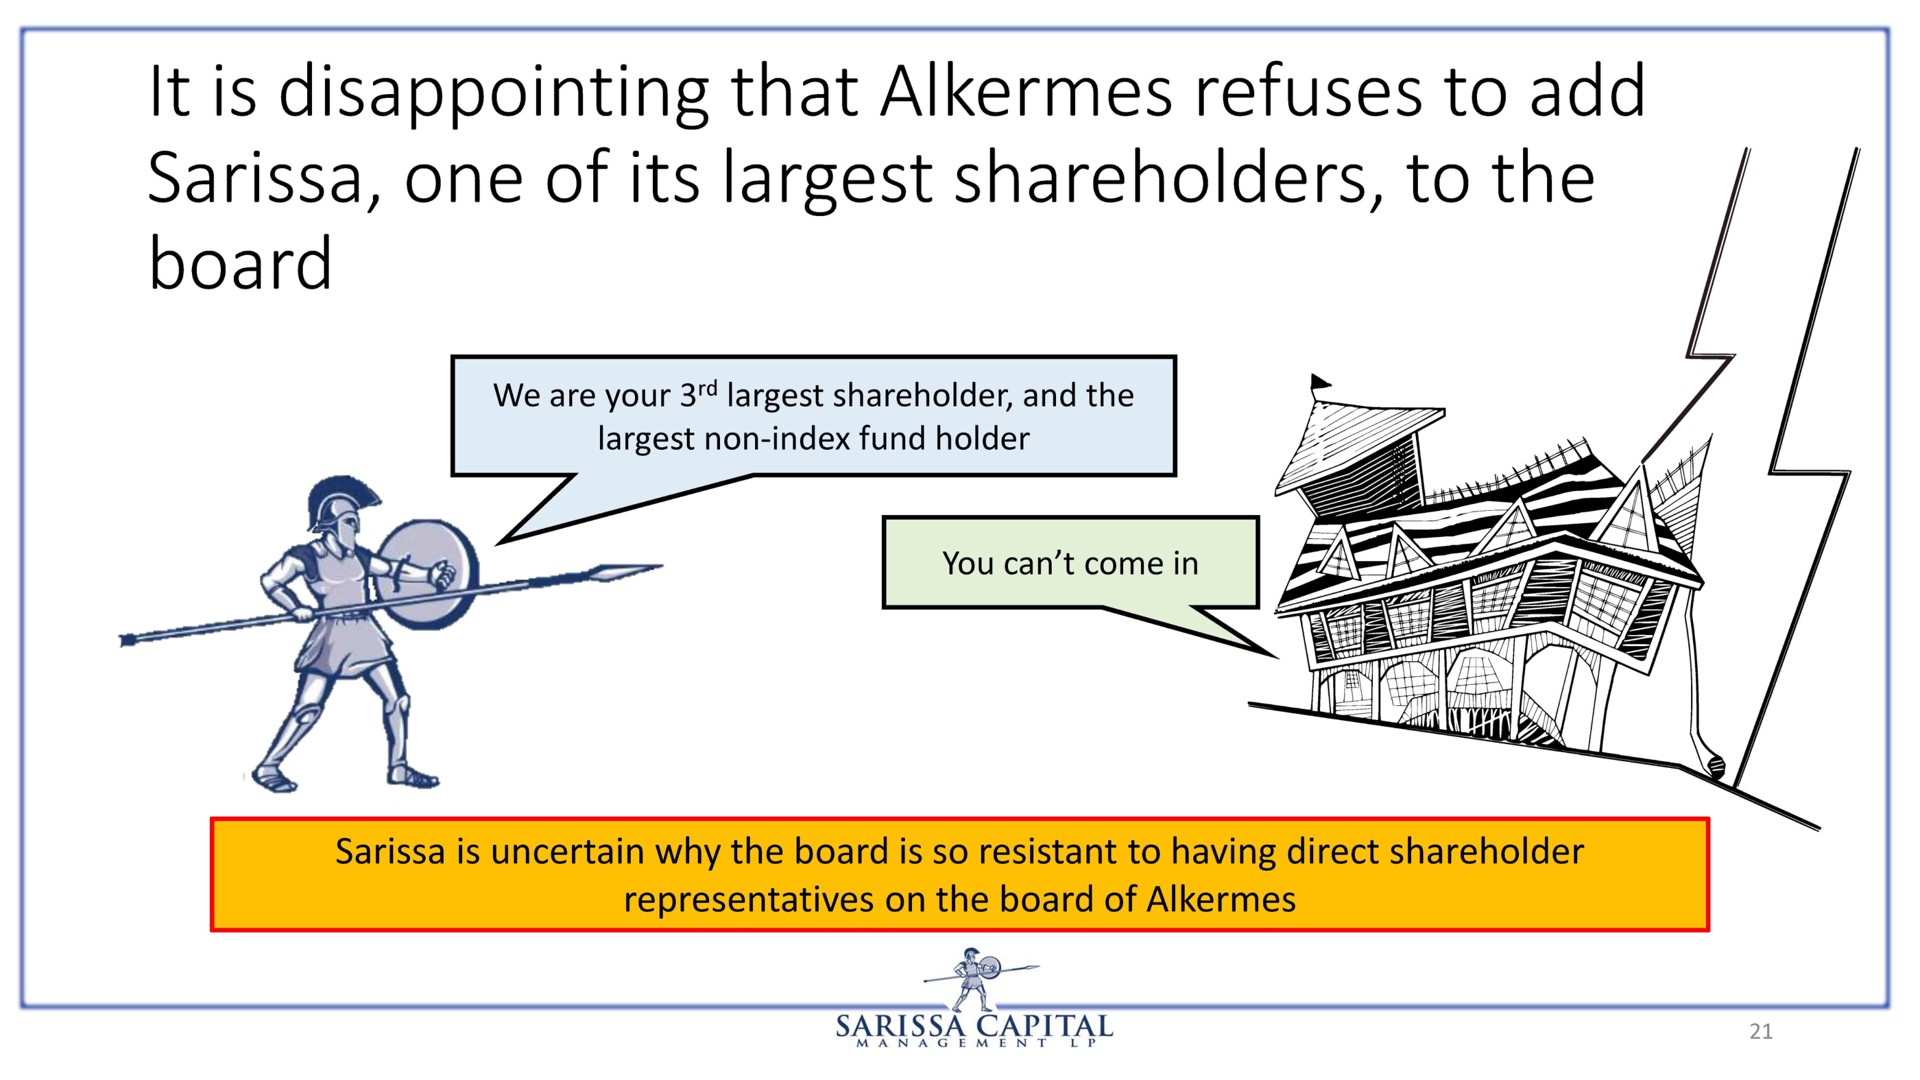 is disappointing that alkermes refuses to add it one of its shareholders to the board | Sarissa Capital